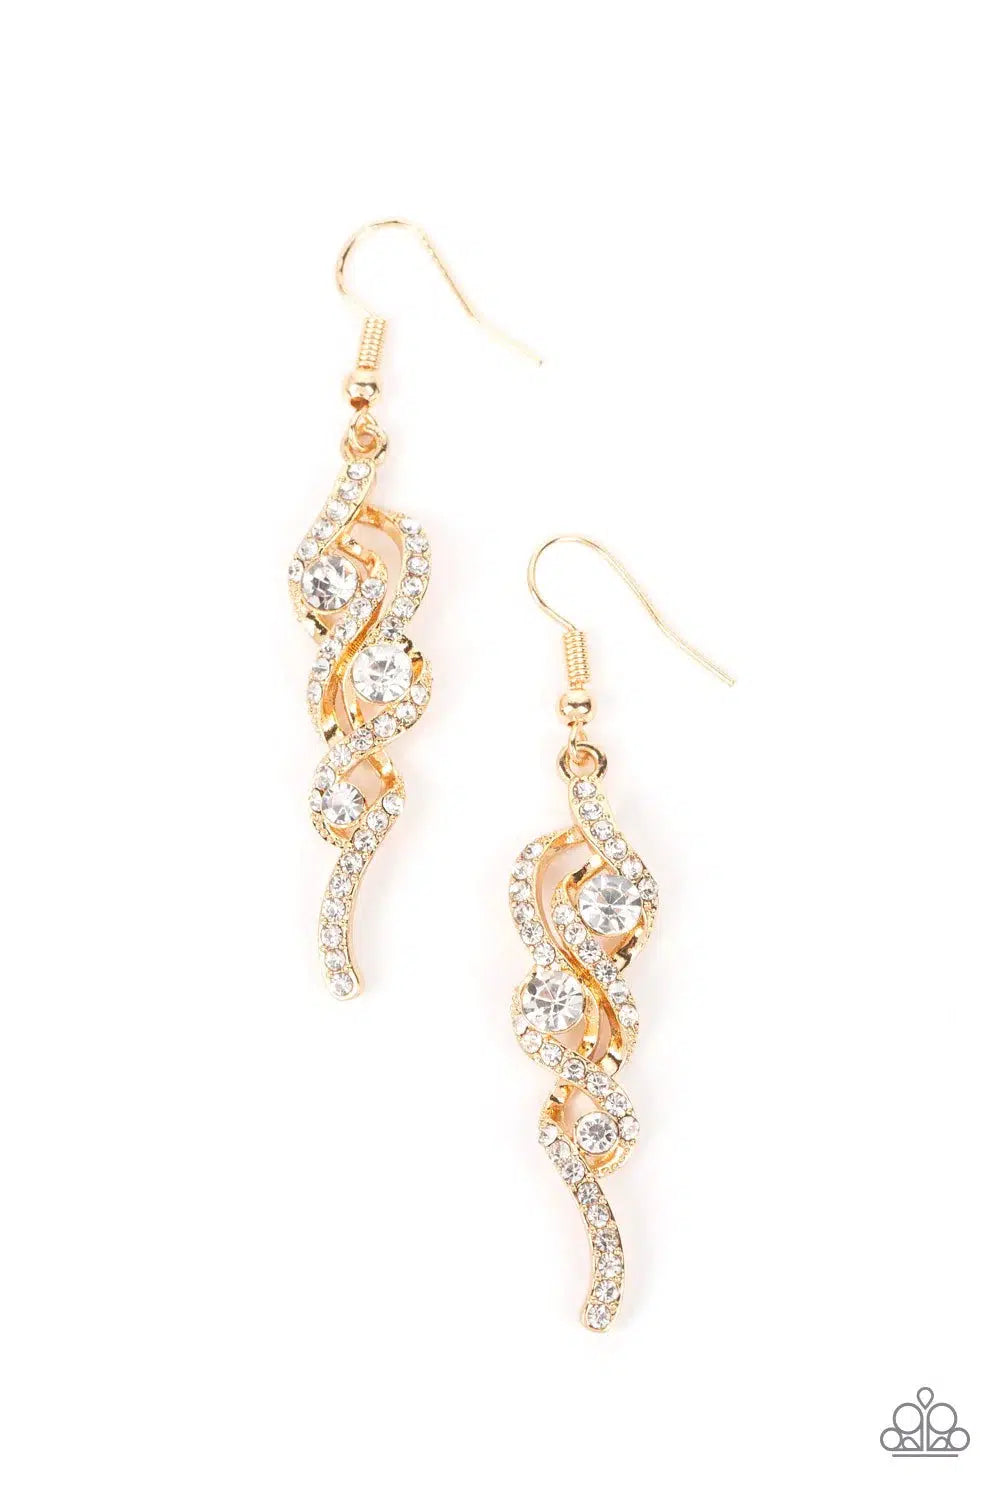 Highly Flammable Gold & White Rhinestone Earrings - Paparazzi Accessories- lightbox - CarasShop.com - $5 Jewelry by Cara Jewels